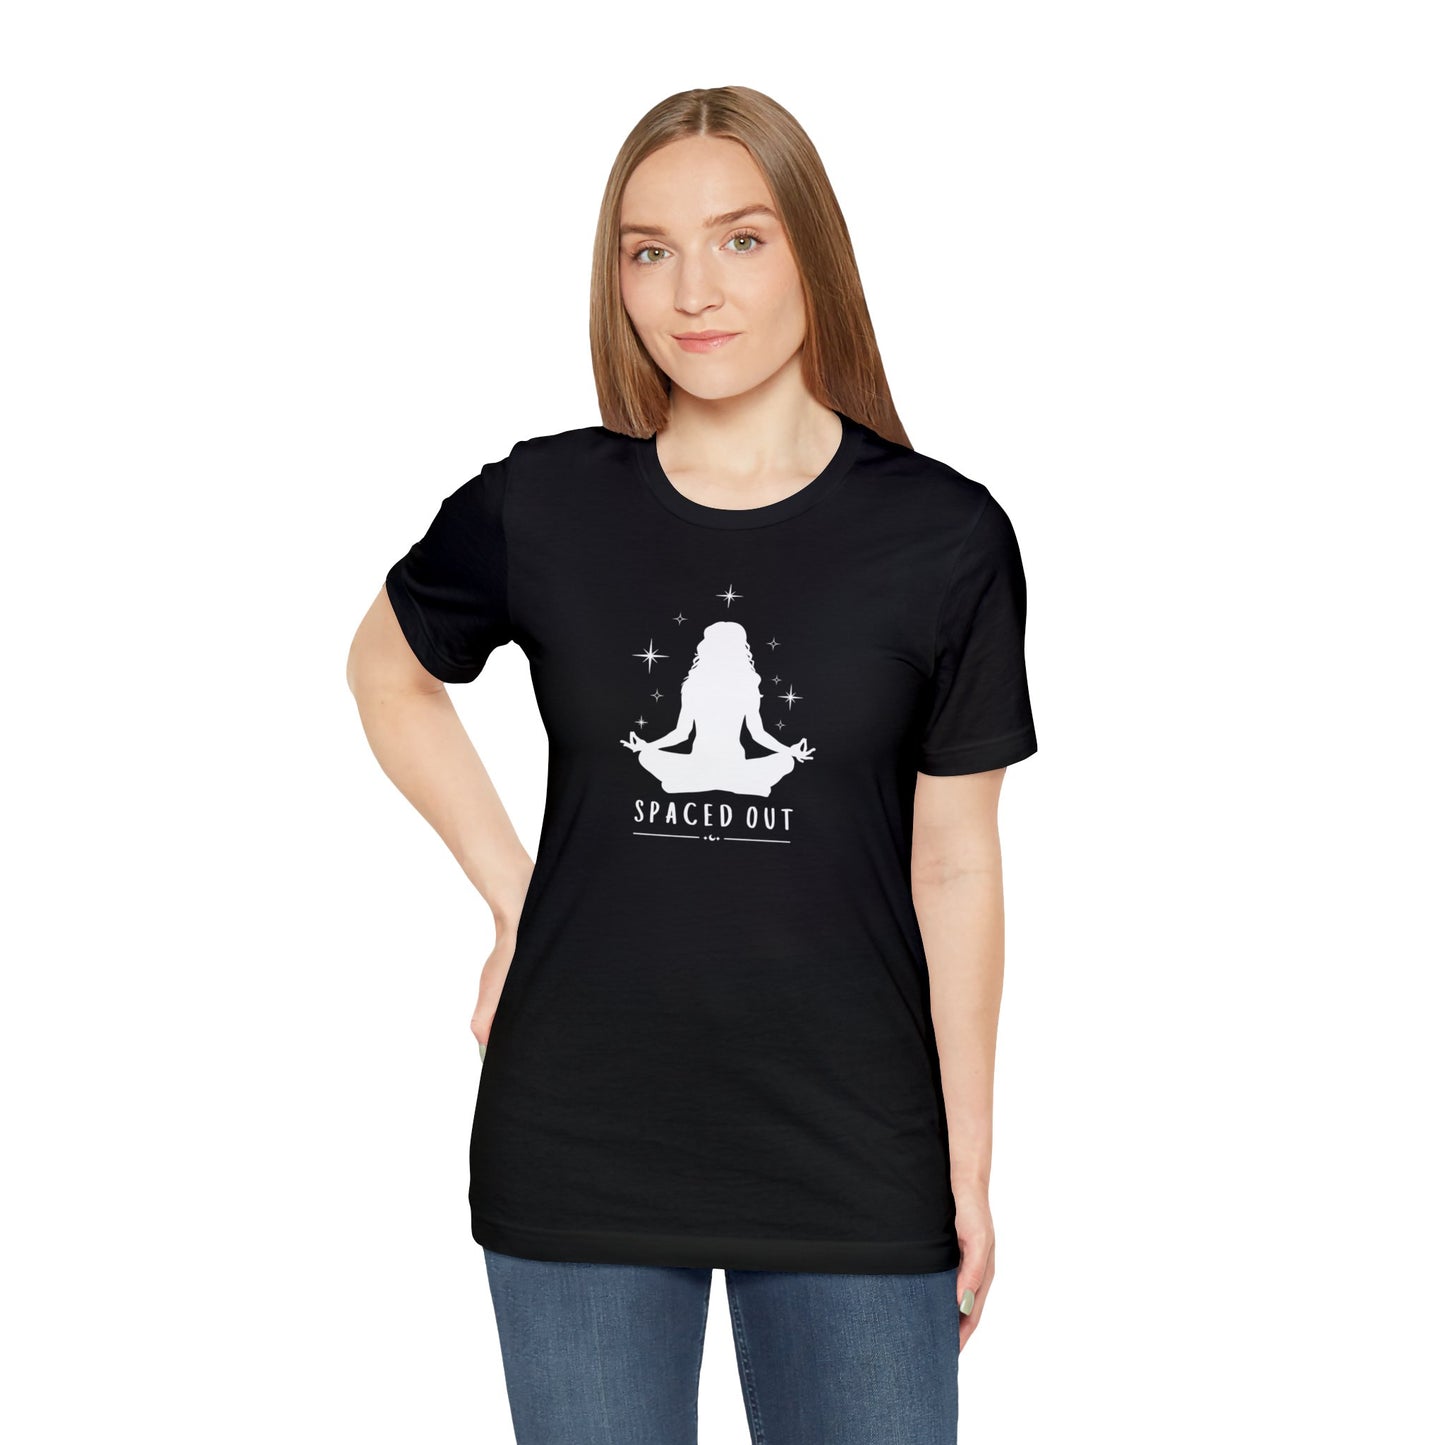 Spaced Out Cosmic Unisex Short Sleeve Tee